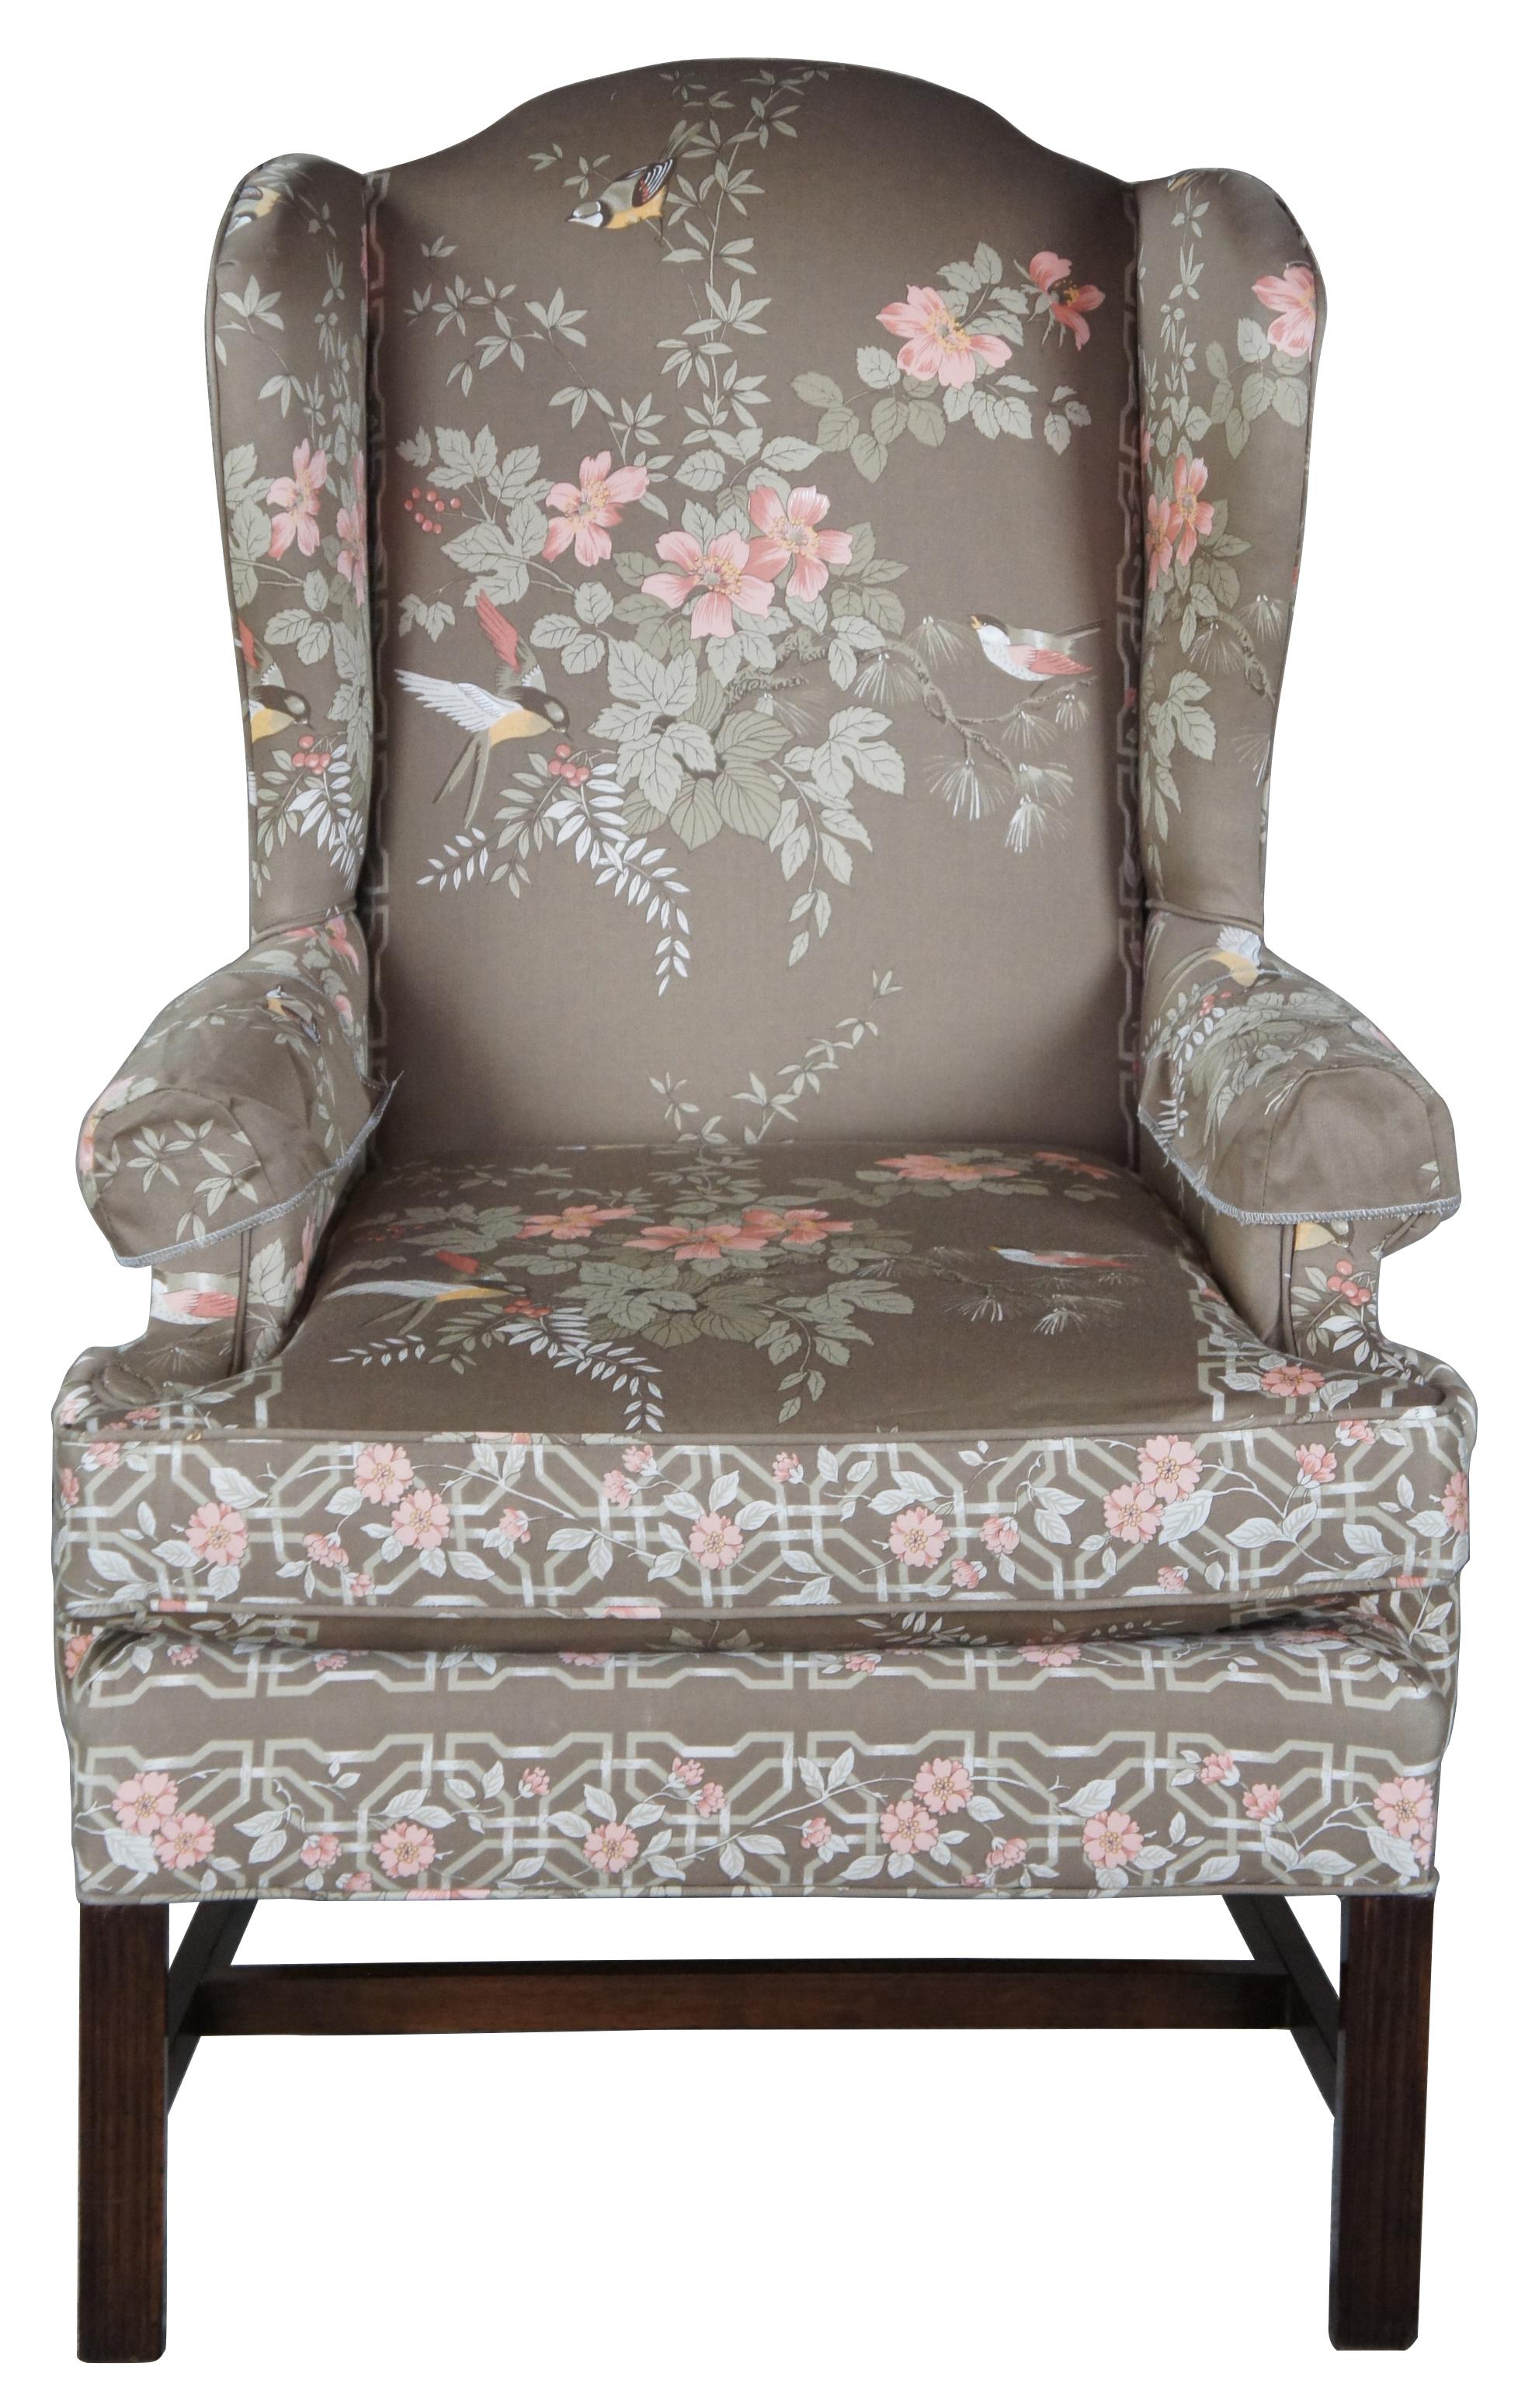 Chippendale style wingback chair, circa 1980s. Made from mahogany in North Carolina. Features a silk upholstery with hummingbirds and flowers.